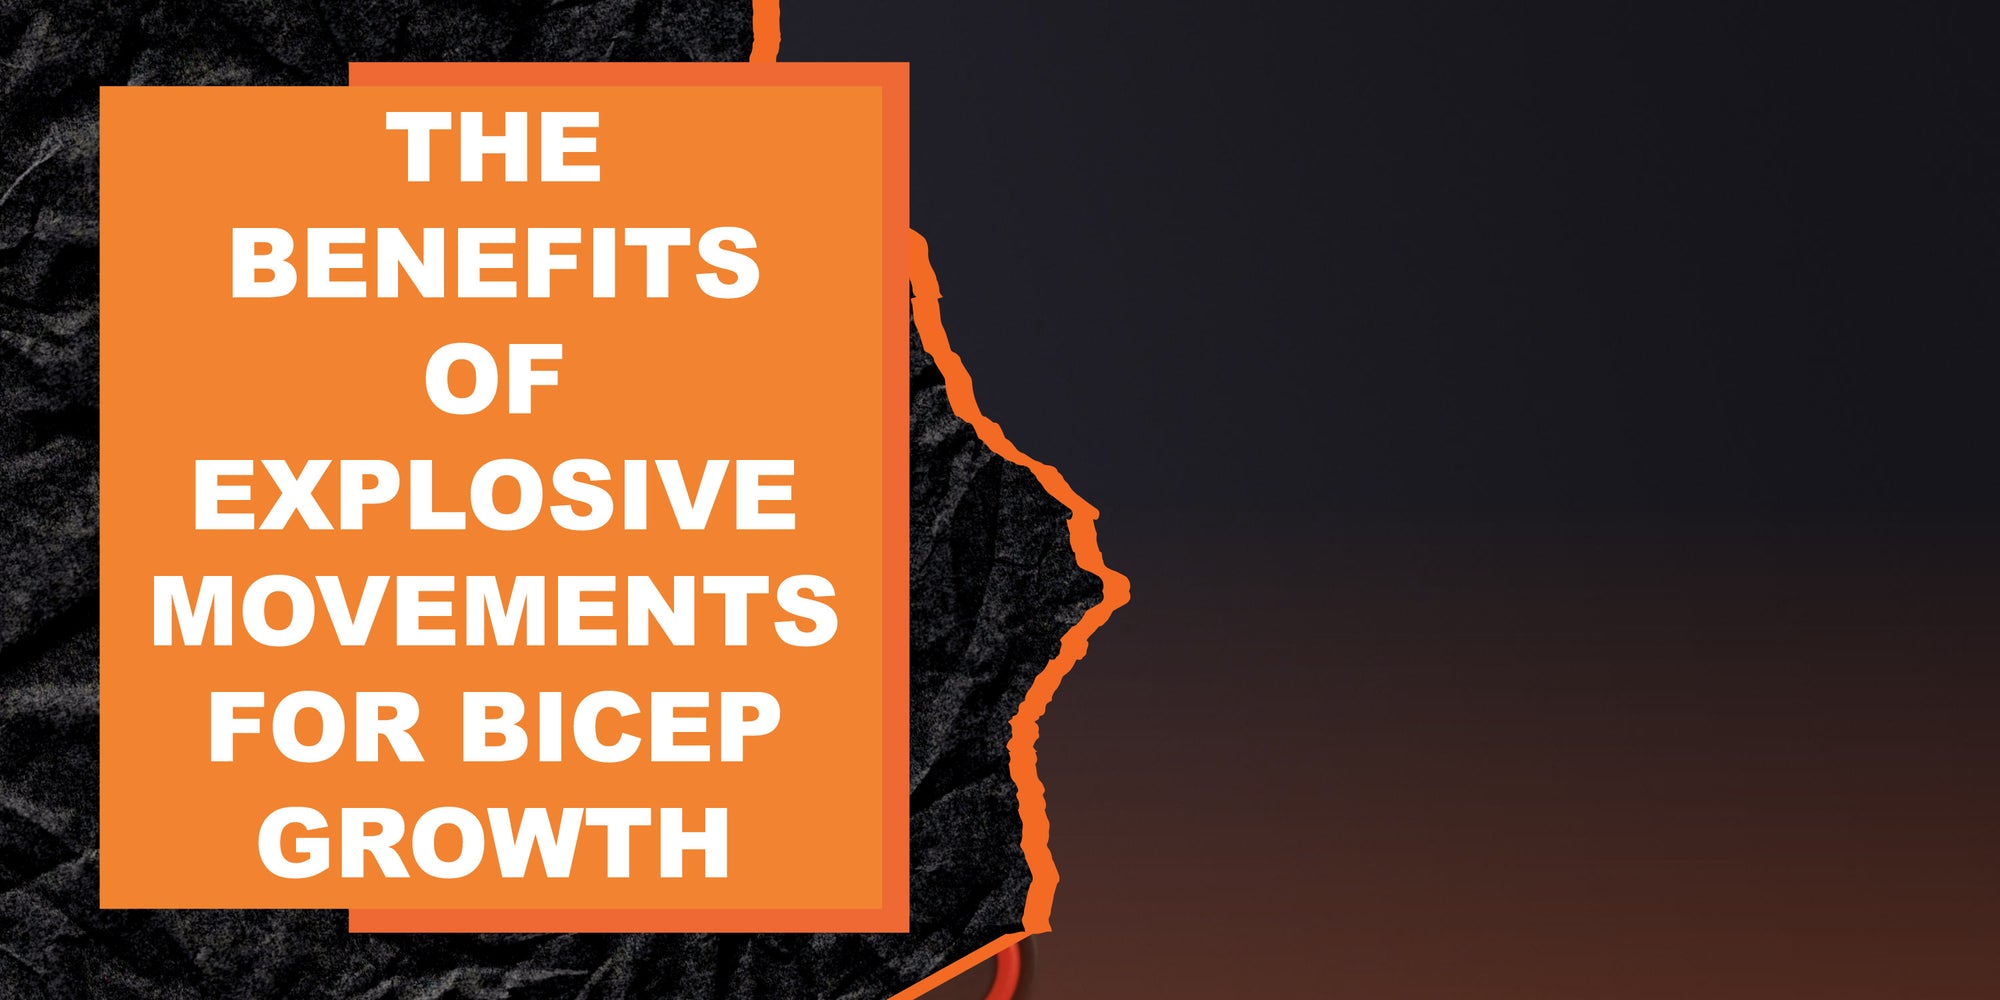 The Benefits of Explosive Movements for Bicep Growth